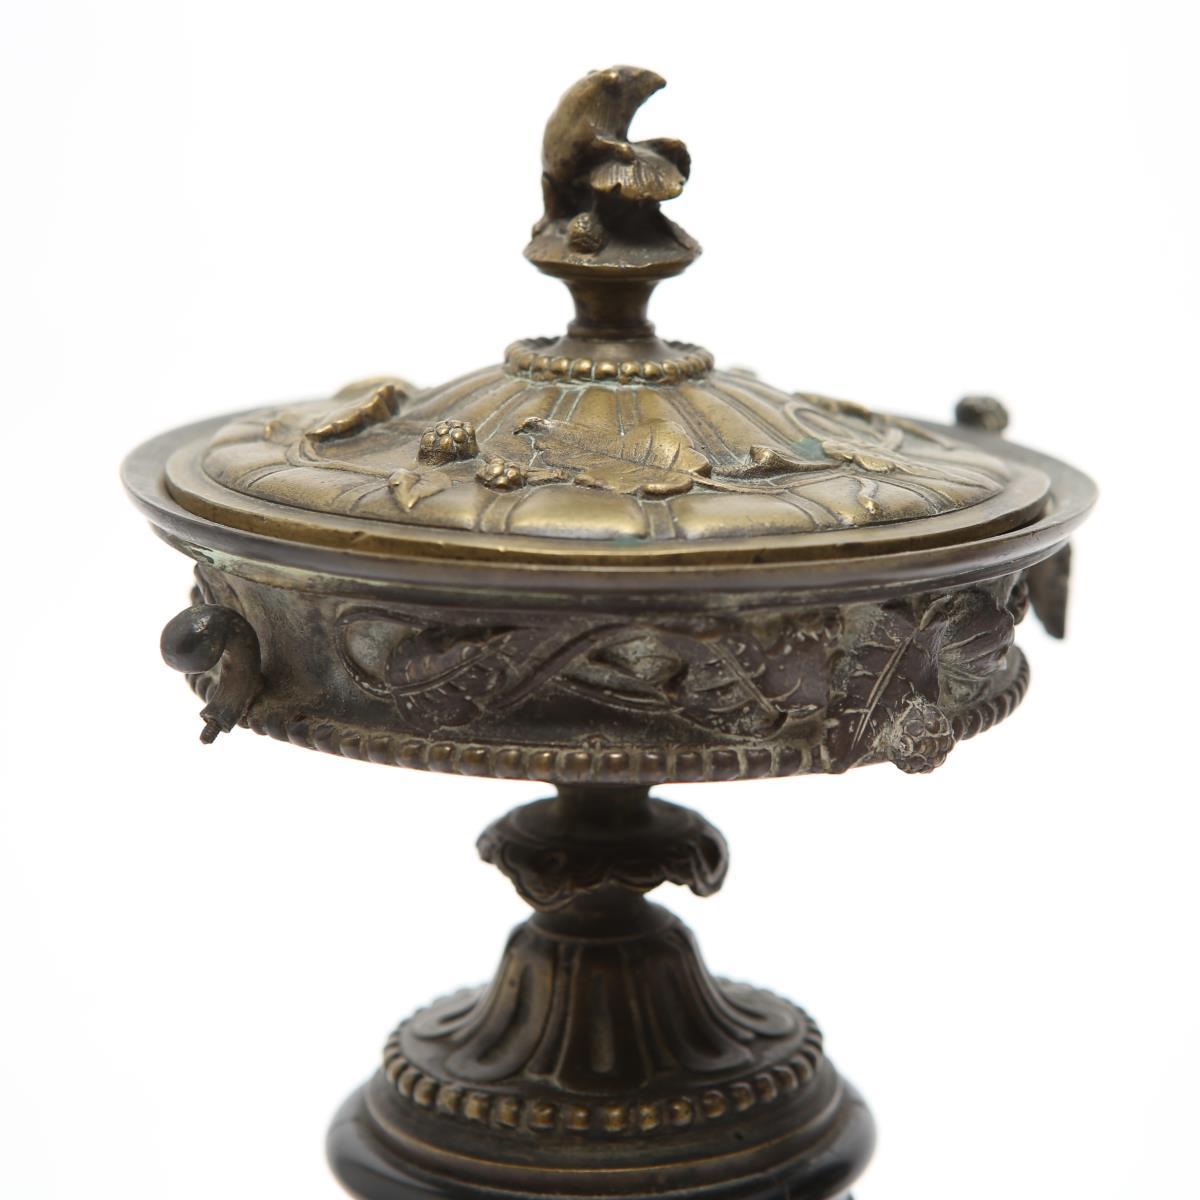 Neoclassical bronze covered tazza urns, cast with high-relief leaves and berries motif, with handles, the base with bead-work and the black marble plinths with applied bronze relief rondo of classical figures. One cover slightly misshapen and one